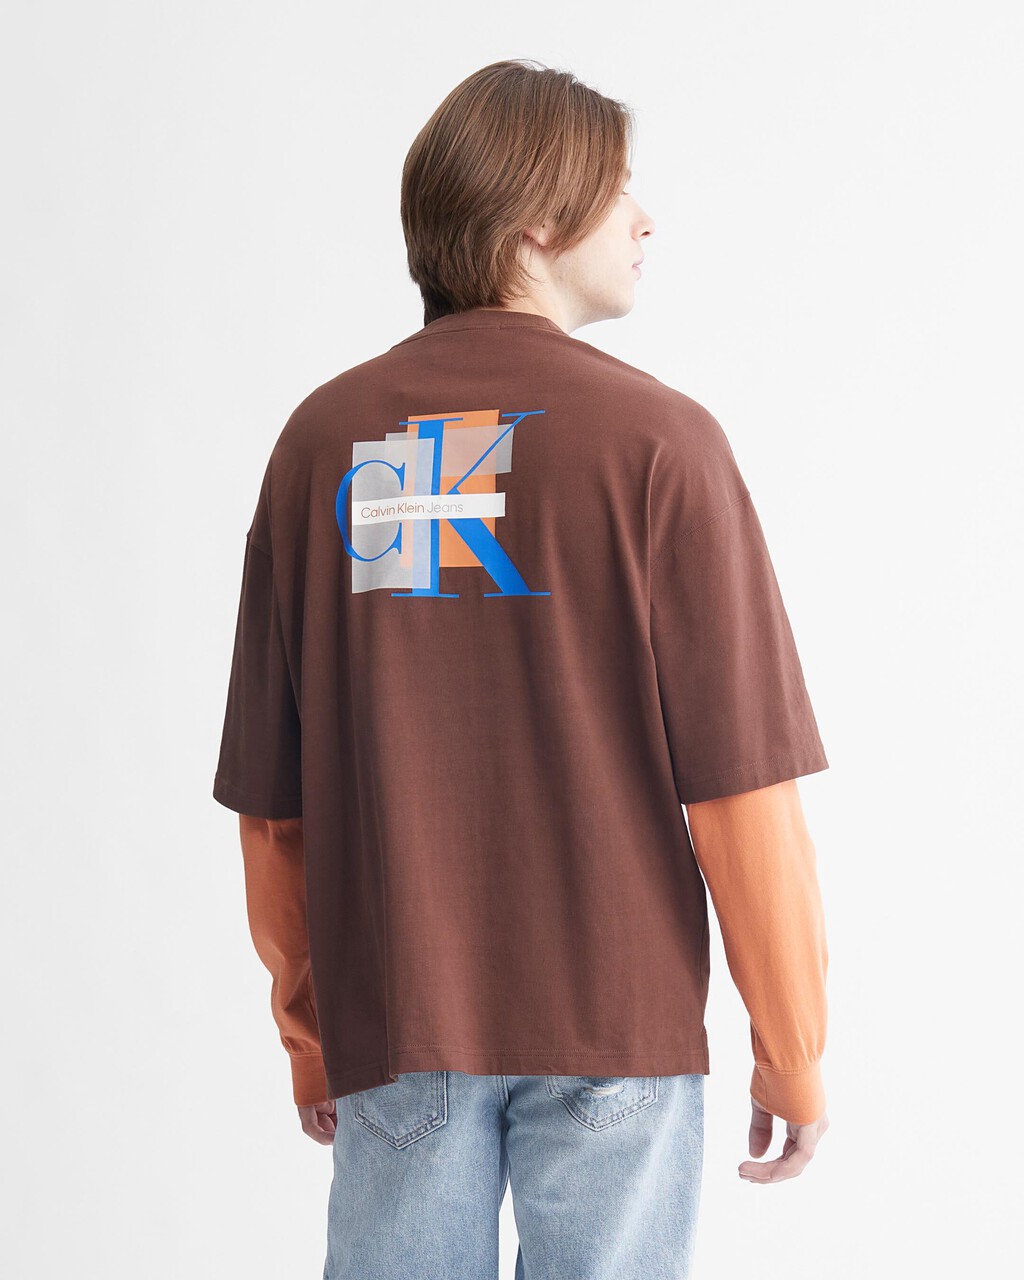 Connected Layers Contrast Sleeve Tee, Dark Chestnut, hi-res